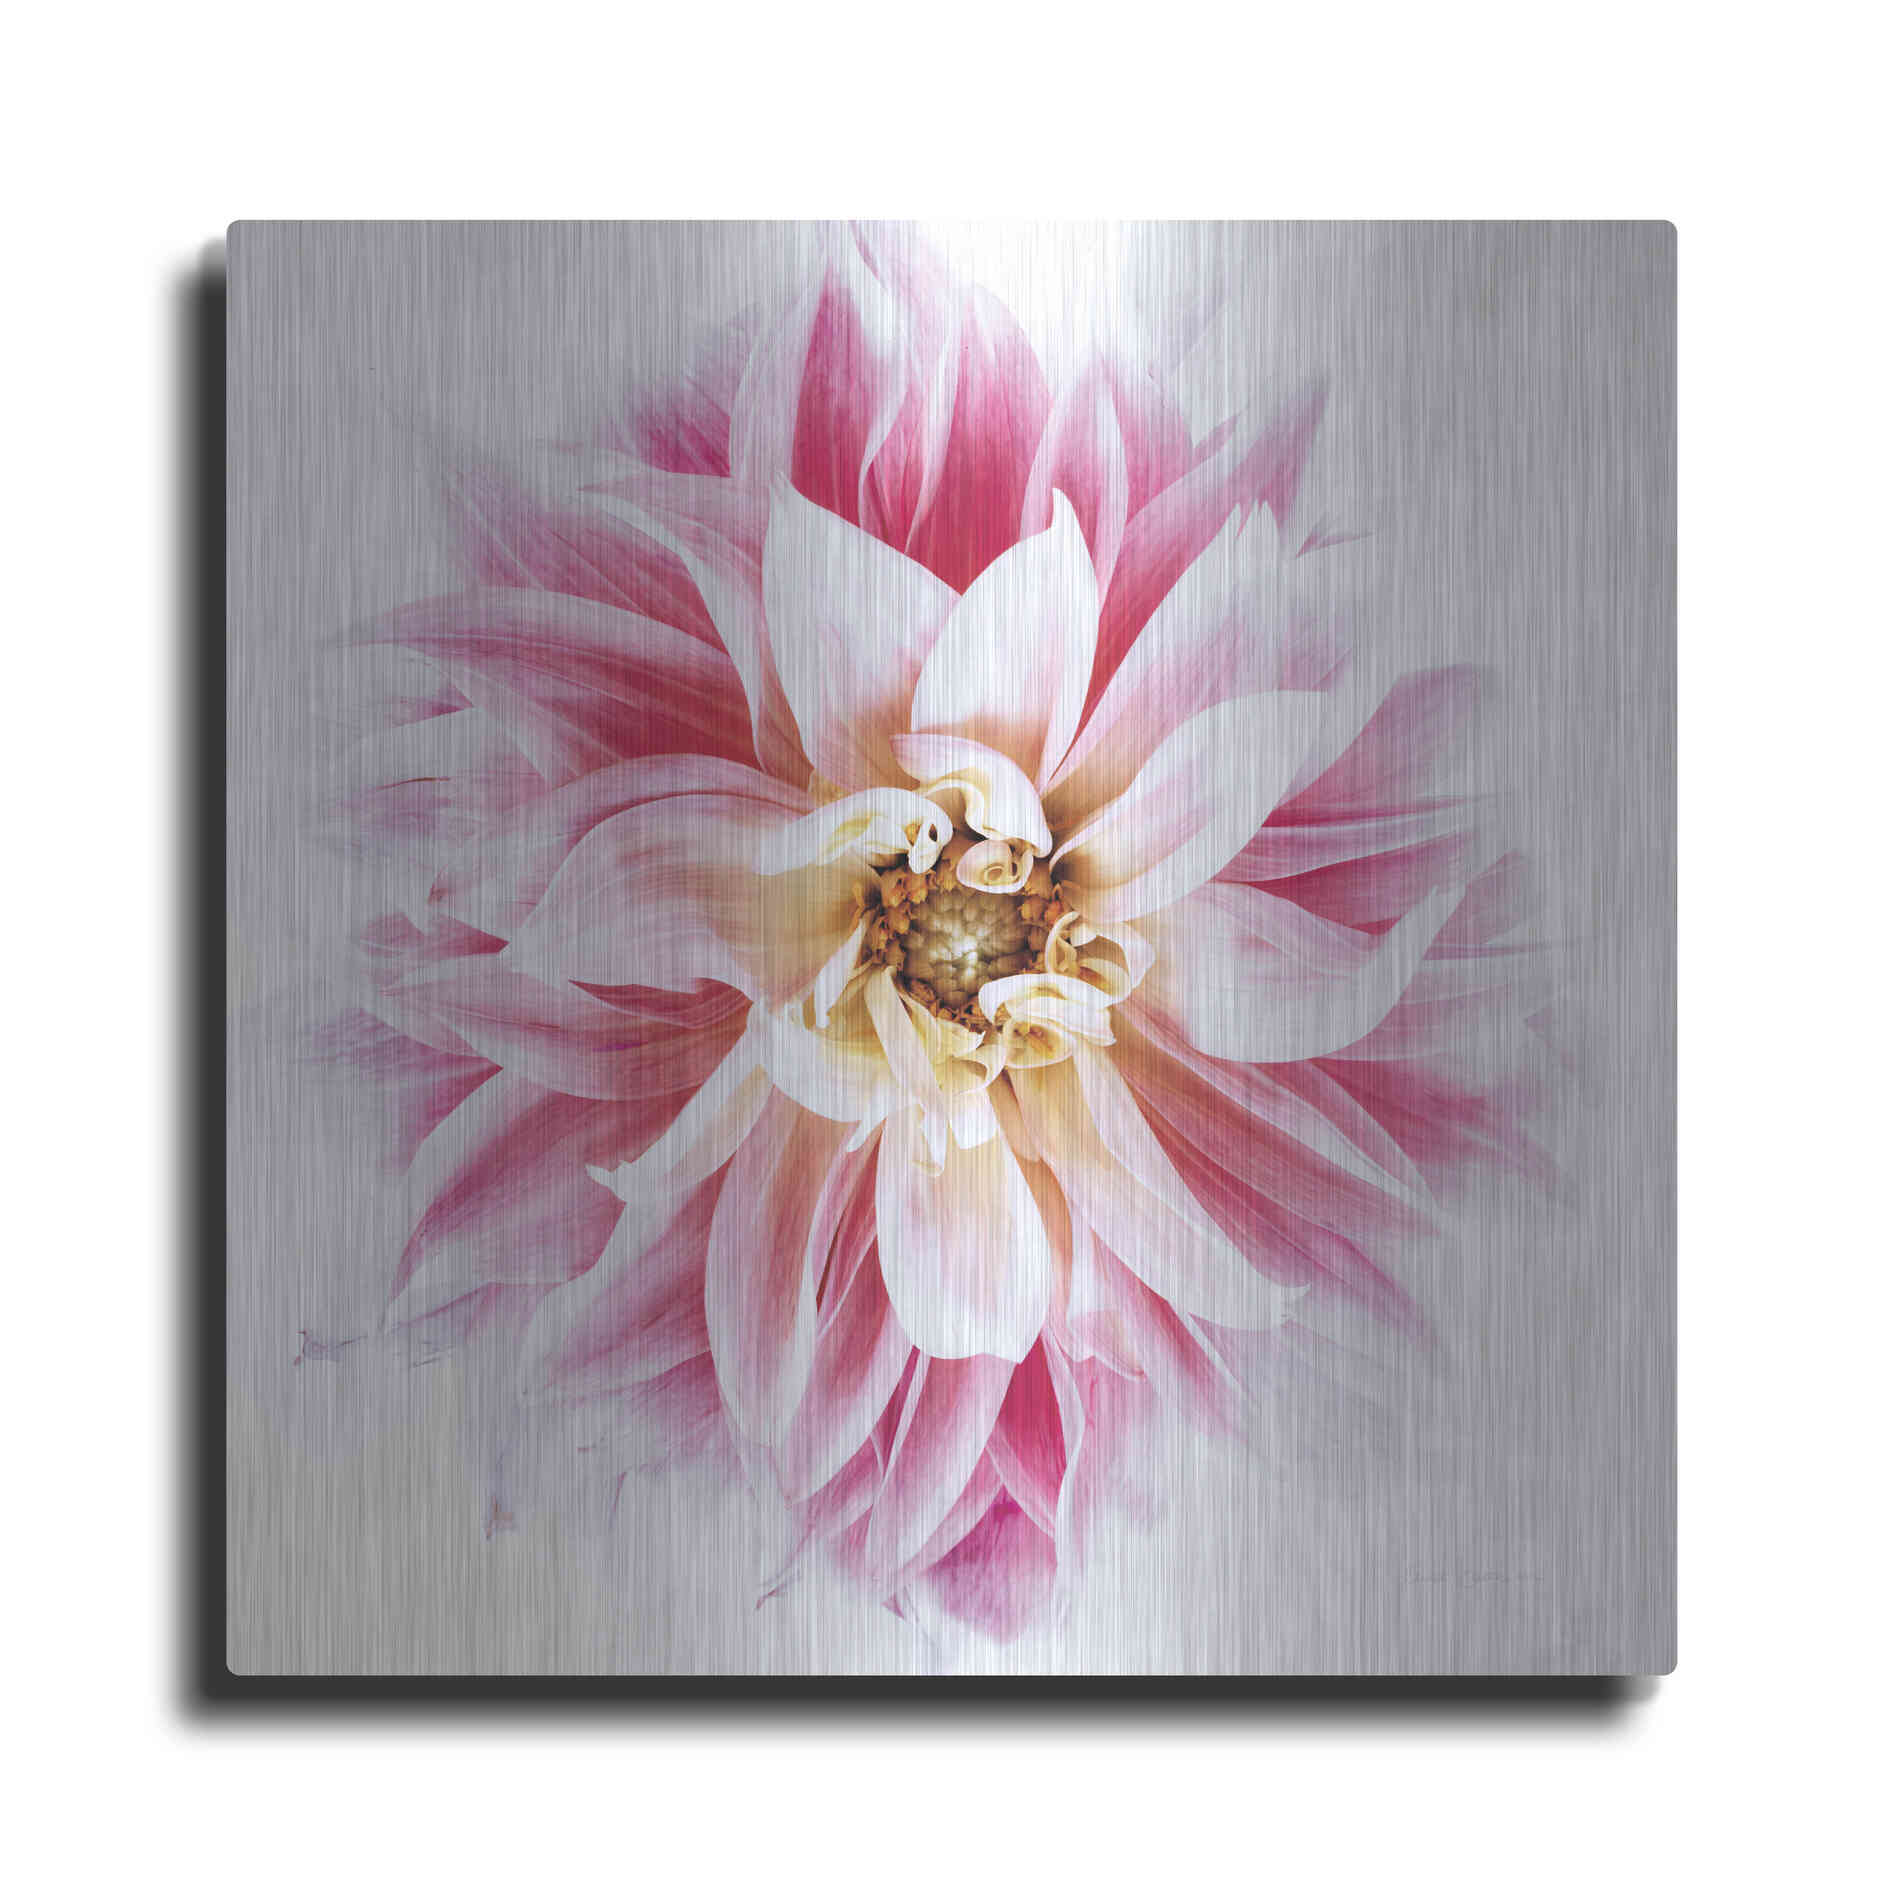 Luxe Metal Art 'Pink Dahlia' by Elise Catterall, Metal Wall Art